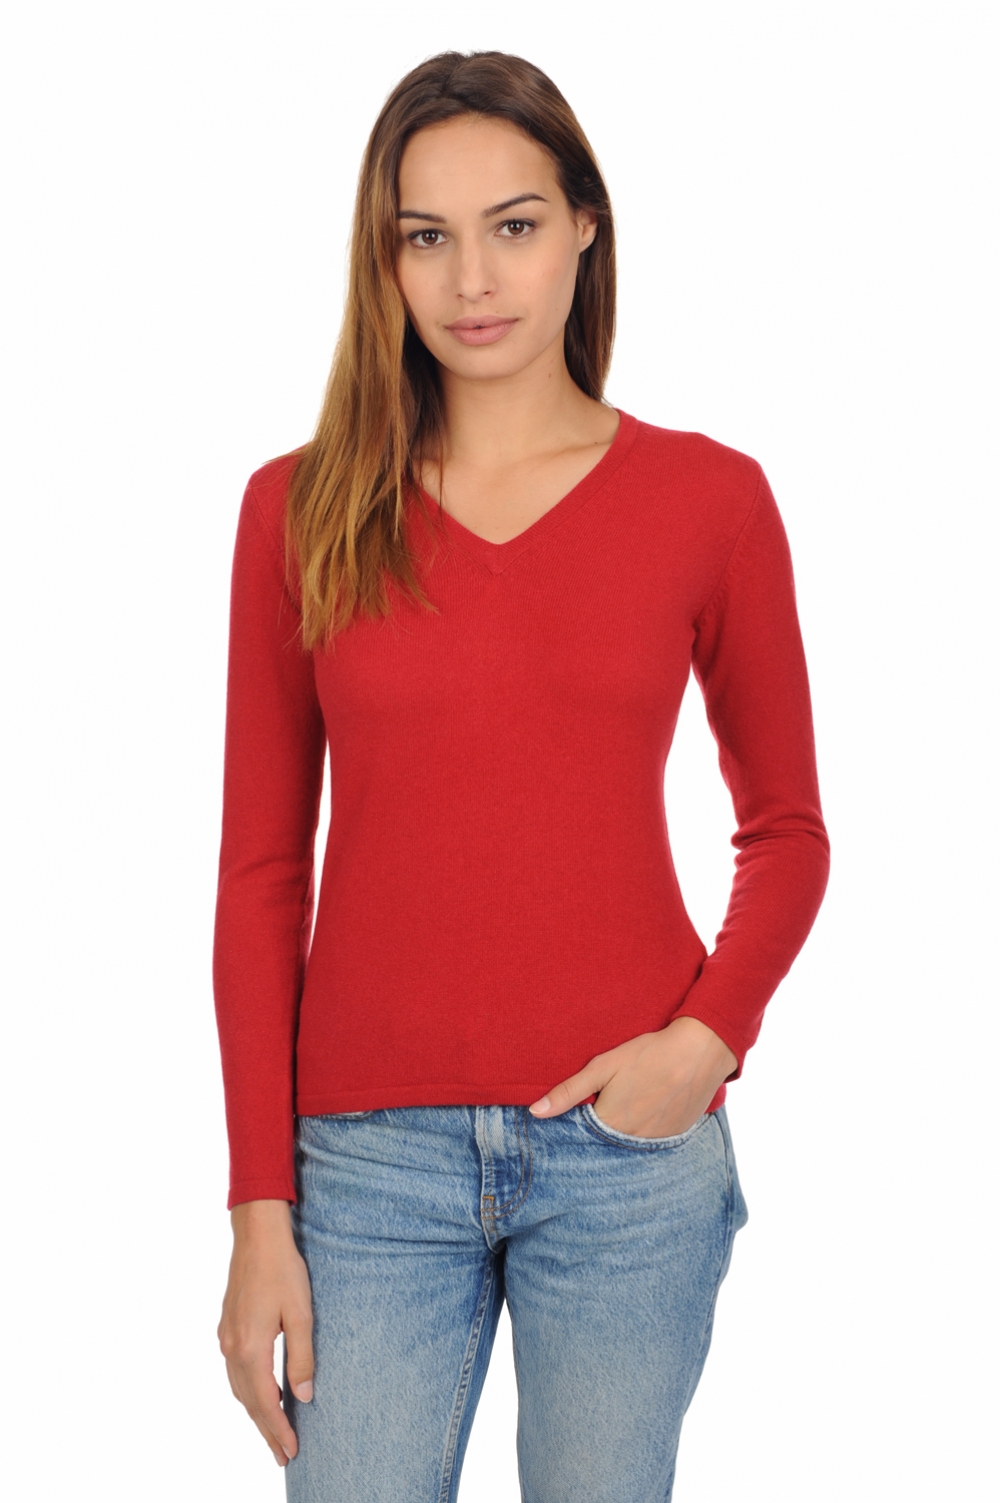 Cashmere ladies timeless classics emma blood red xl